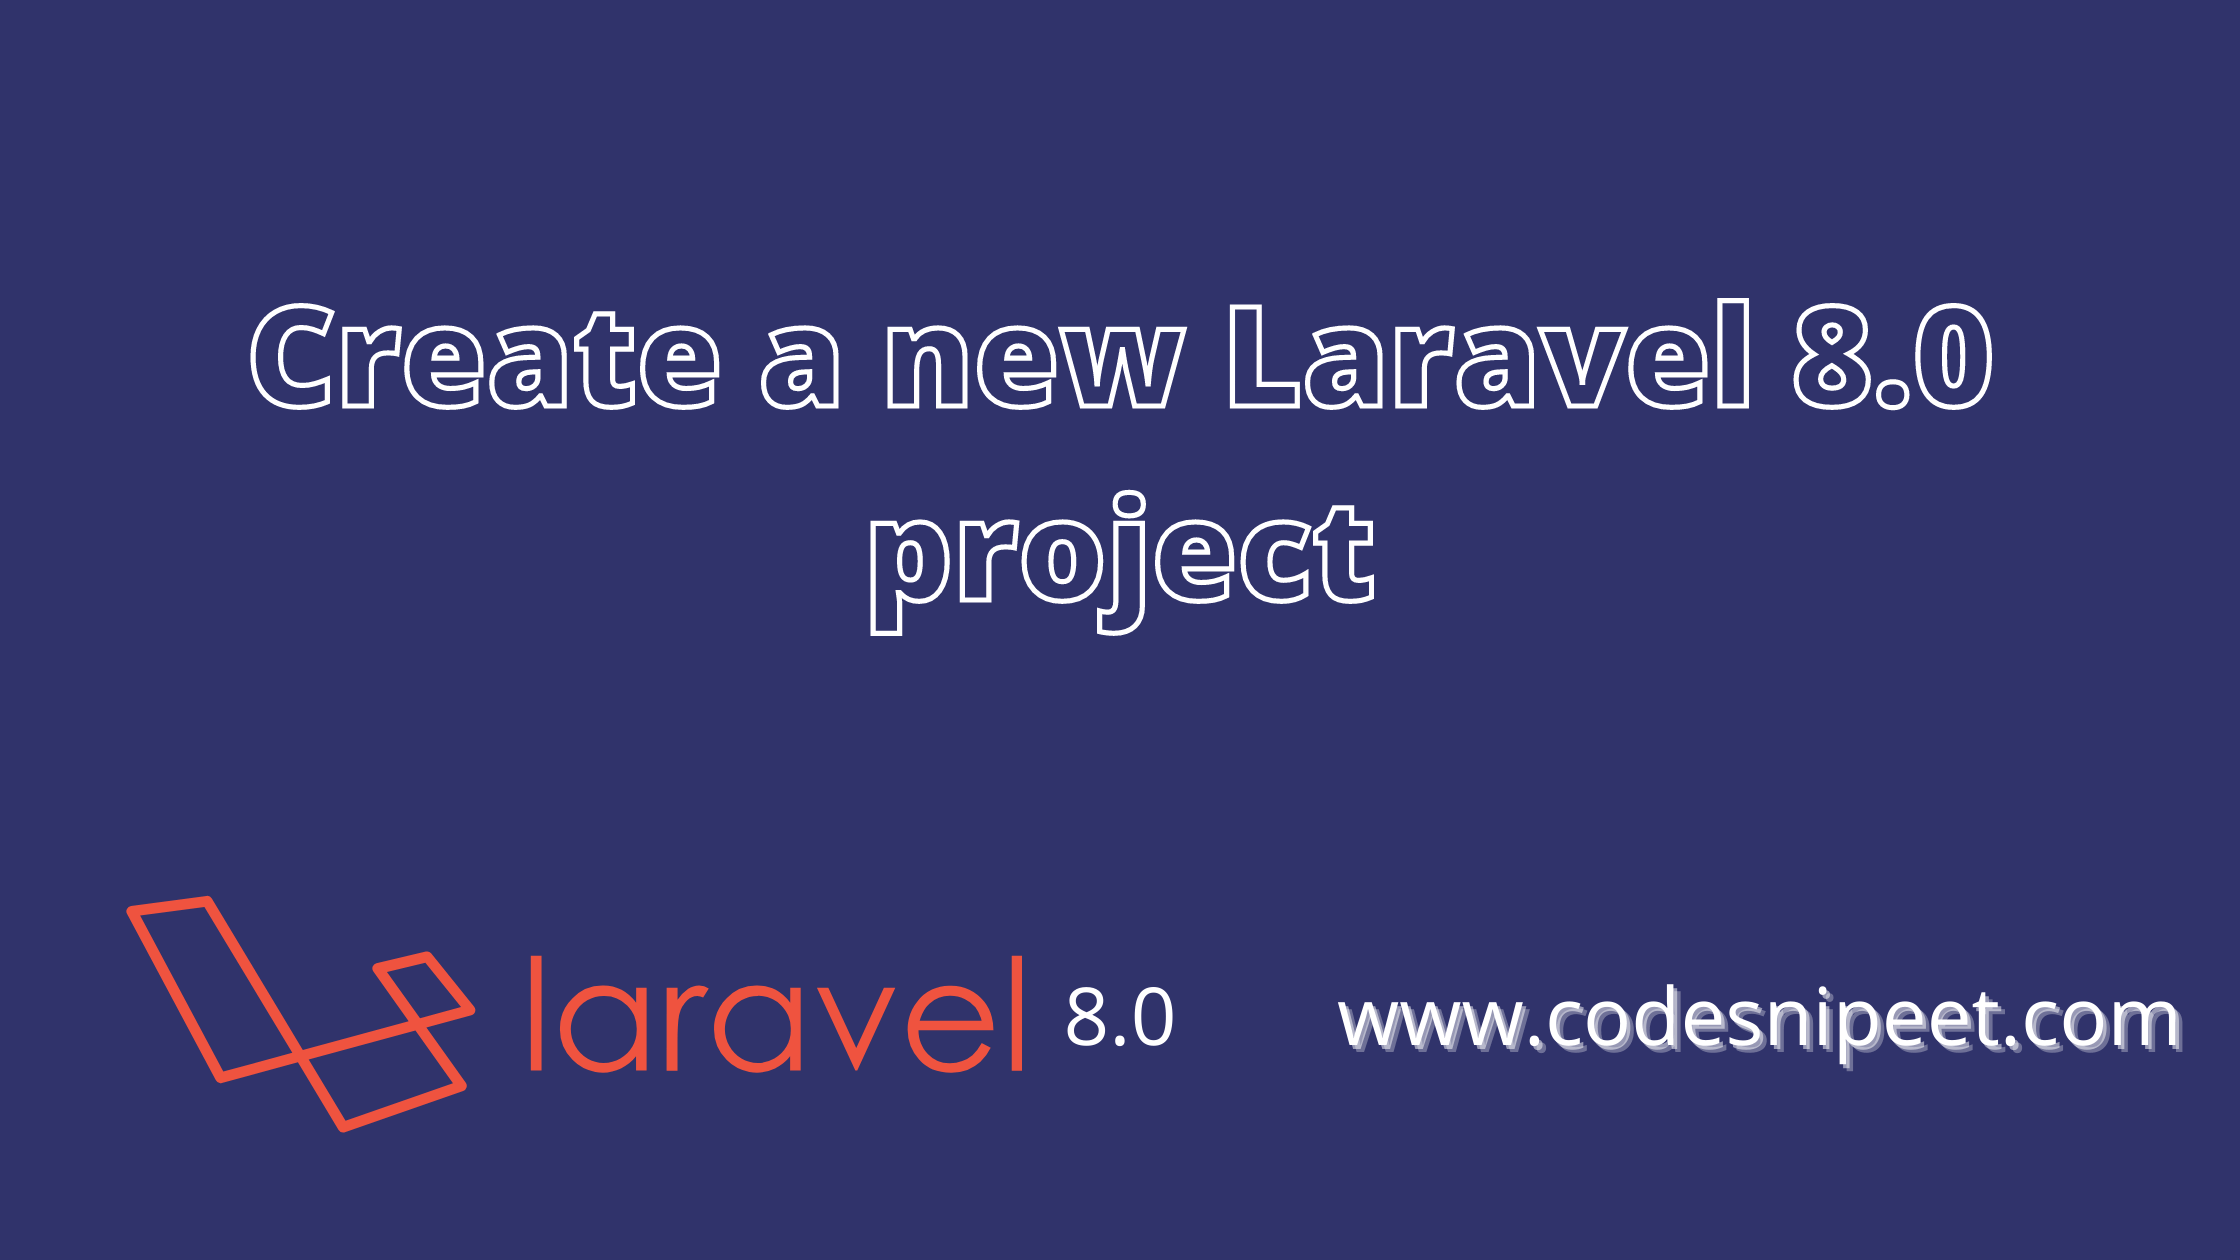 You are currently viewing Create a new Laravel 8.0 project